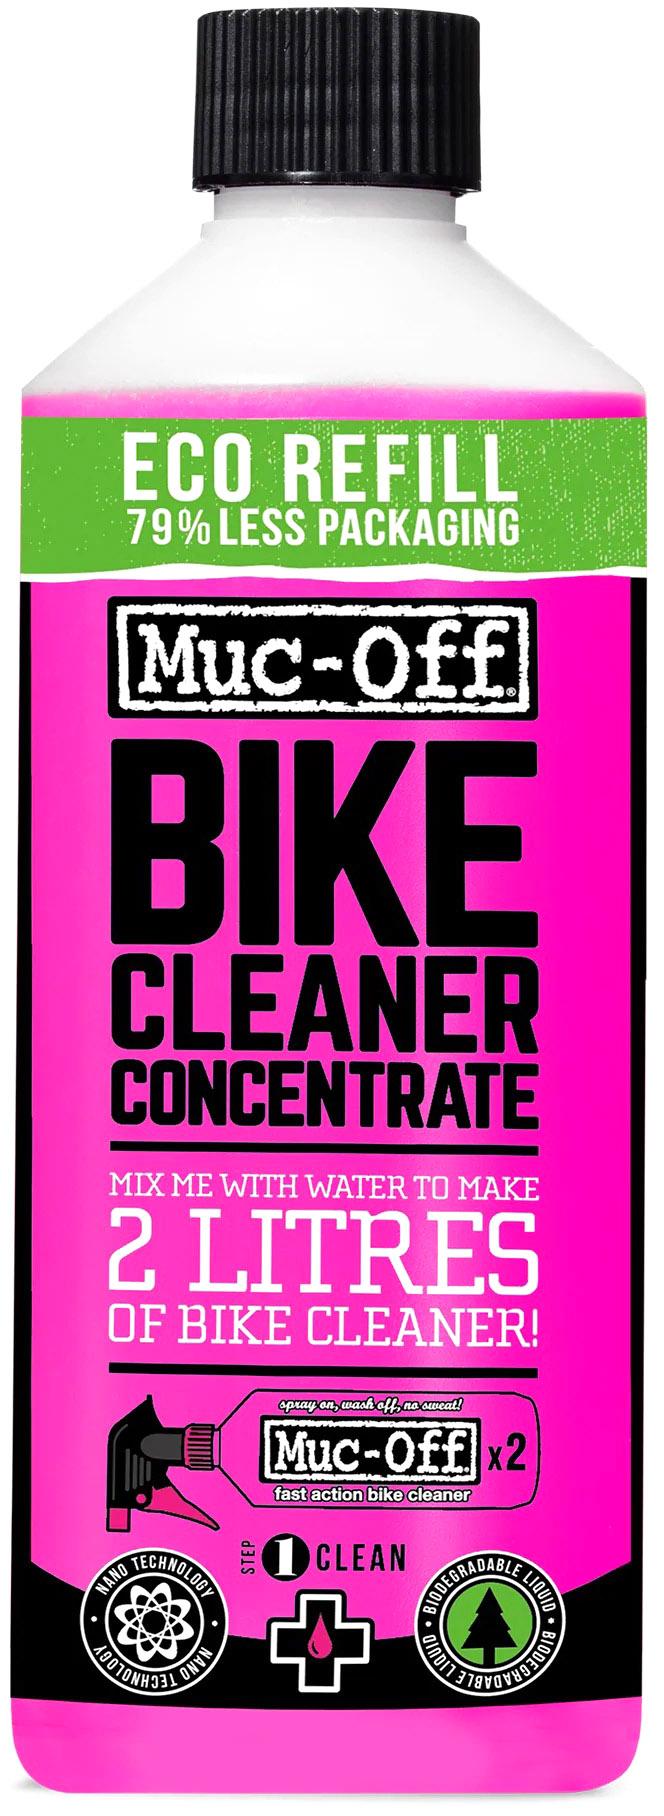 Muc-off Bike Cleaner Concentrate Bottle - Pink